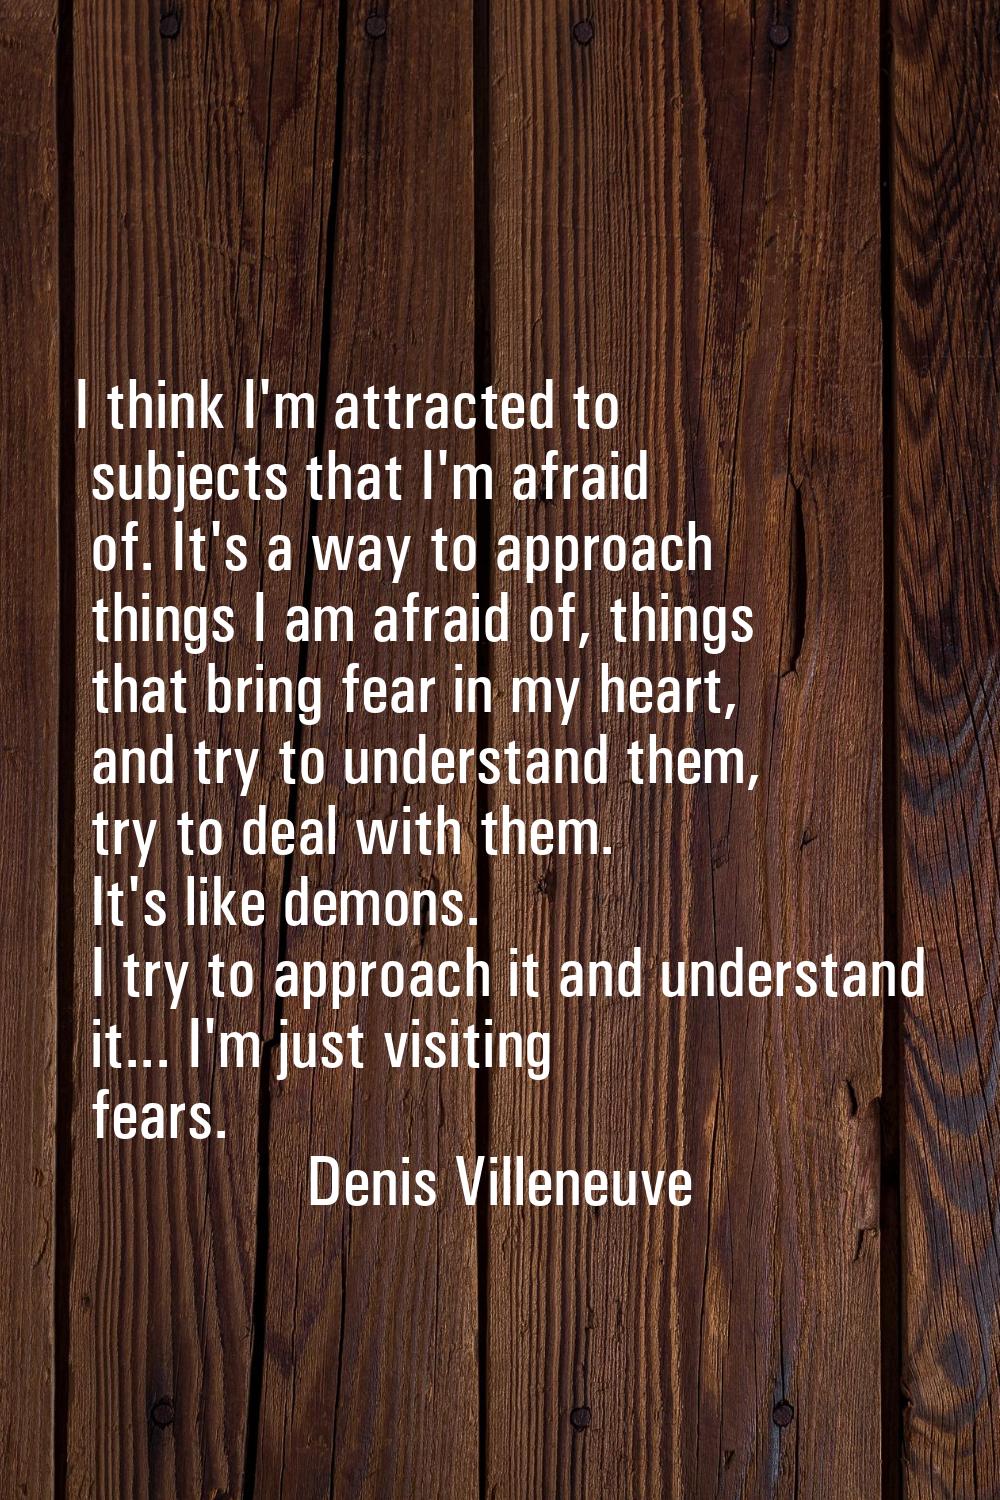 I think I'm attracted to subjects that I'm afraid of. It's a way to approach things I am afraid of,